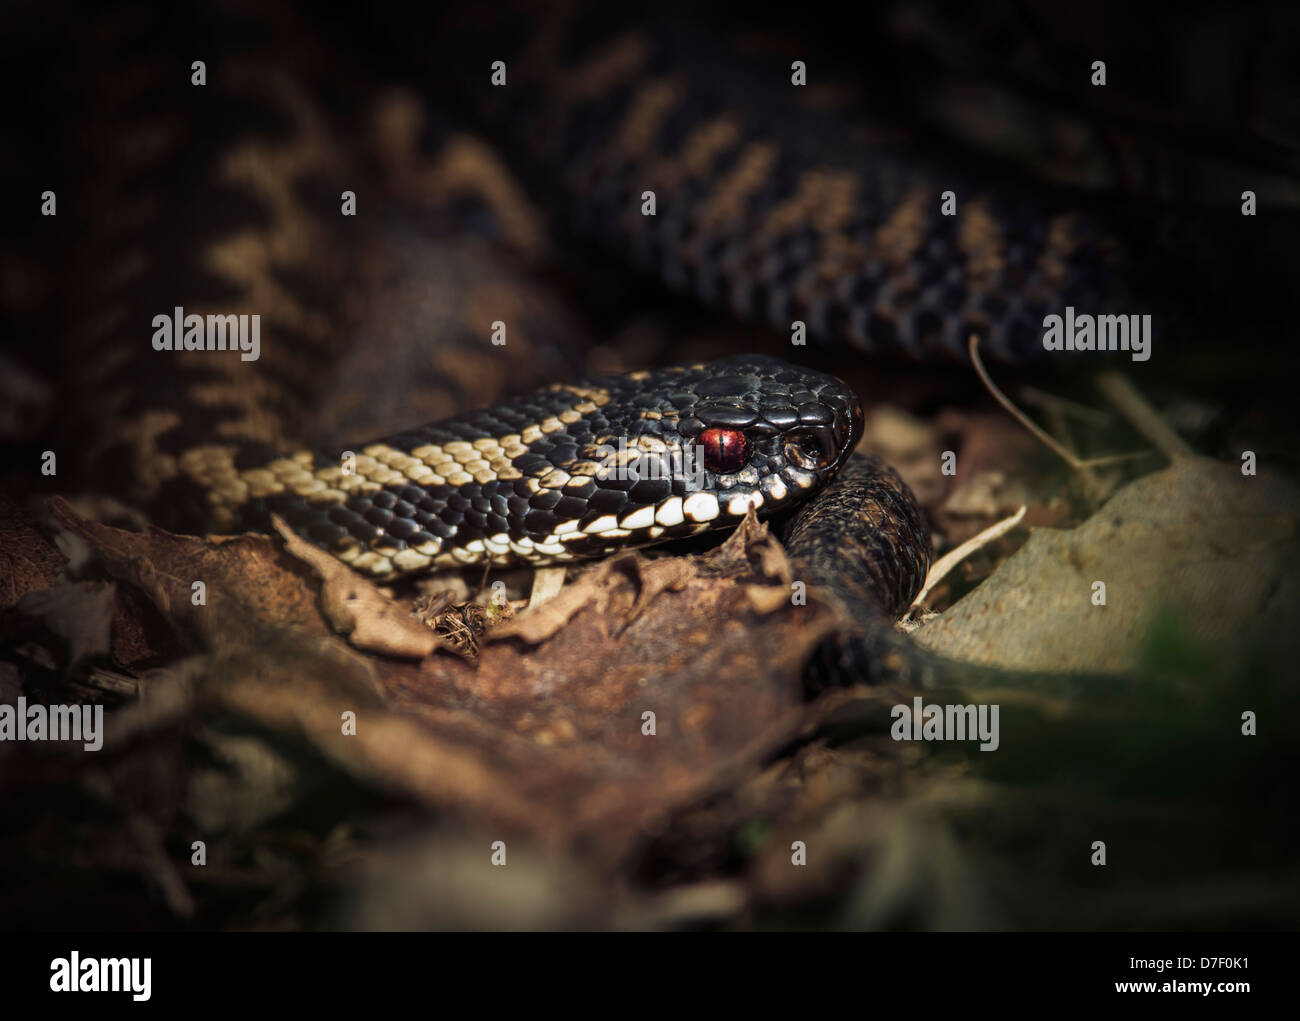 Adder, emerging from the undergrowth into the warm sunlight. Stock Photo